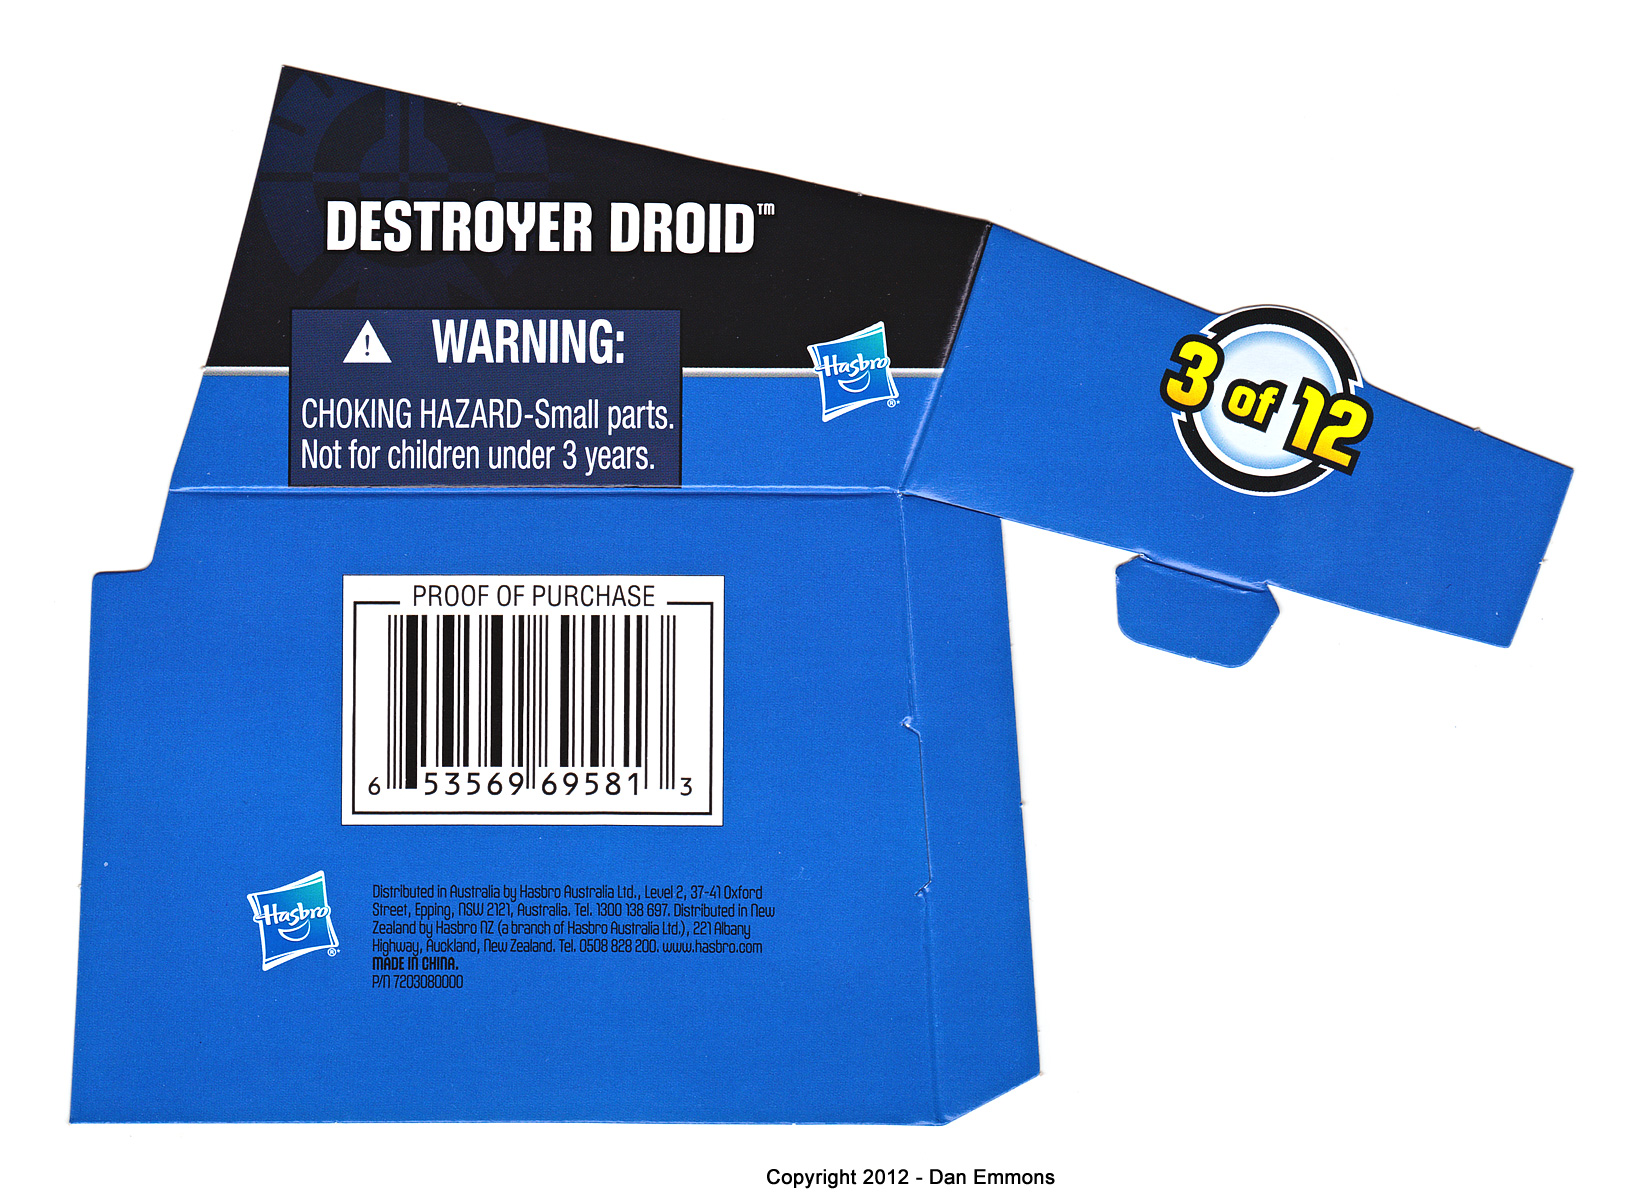 Discover The Force – 3: Destroyer Droid